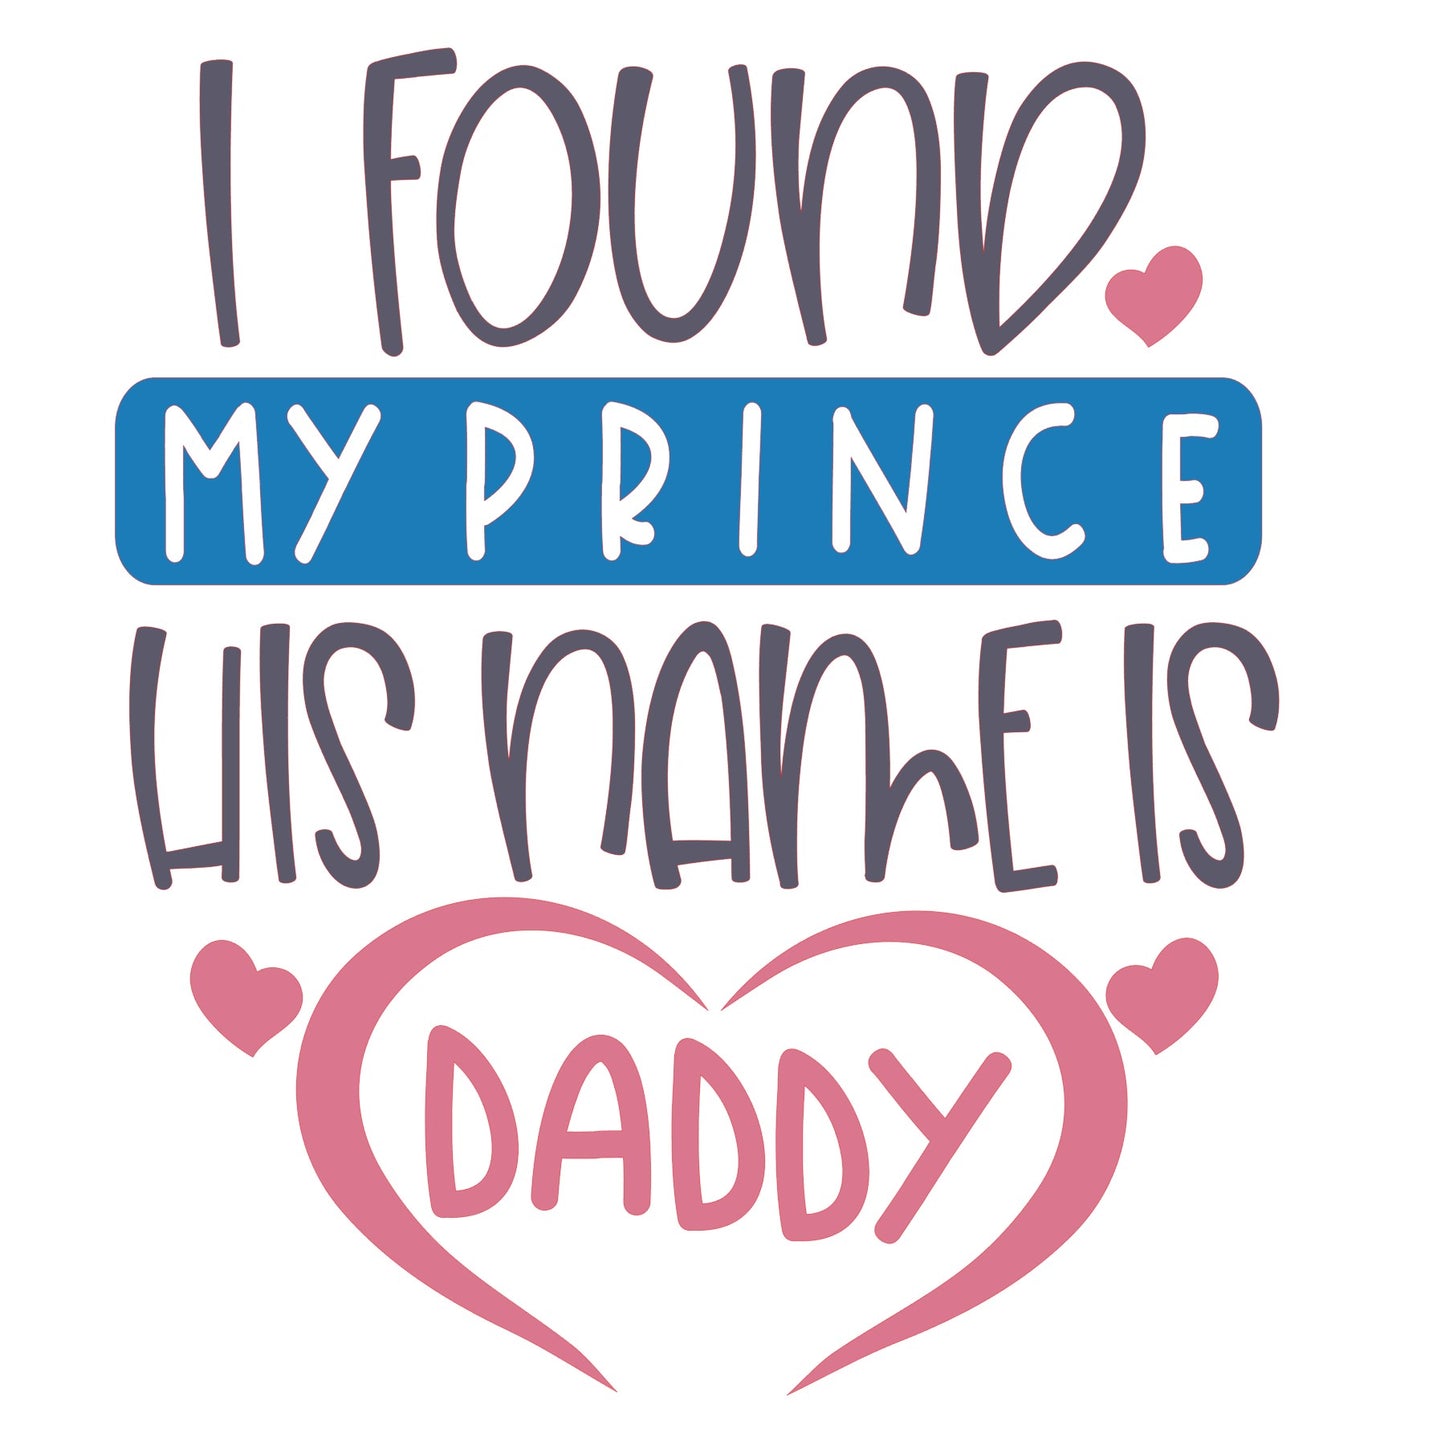 I Found My Prince His Name Is Daddy